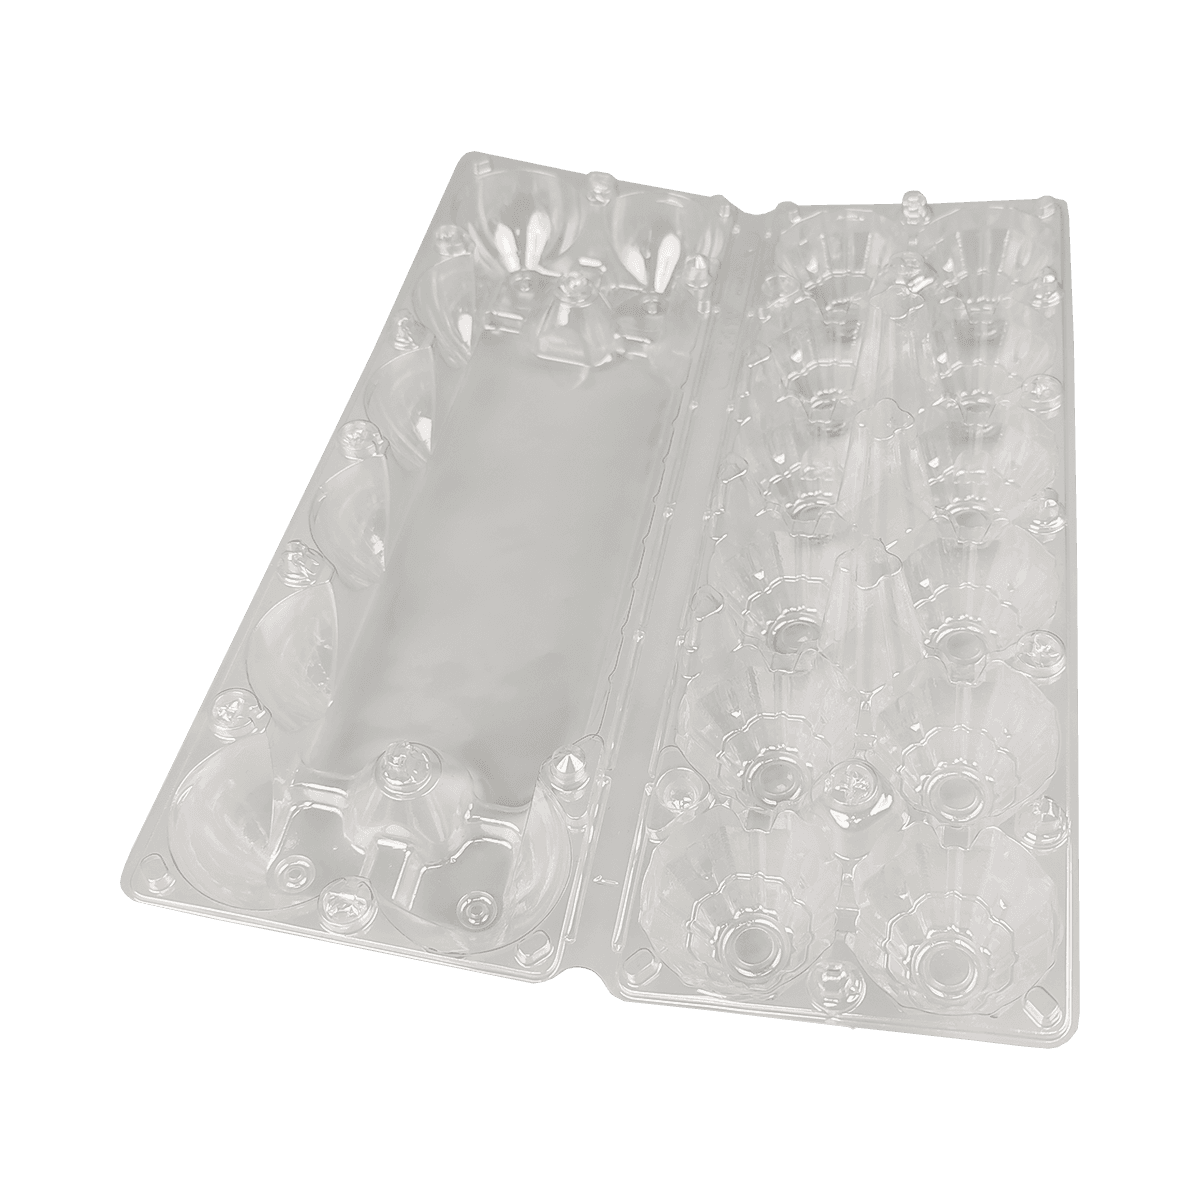 Safe and convenient PET Transparent 12 egg cartons for family-friendly ranching Foreign Version